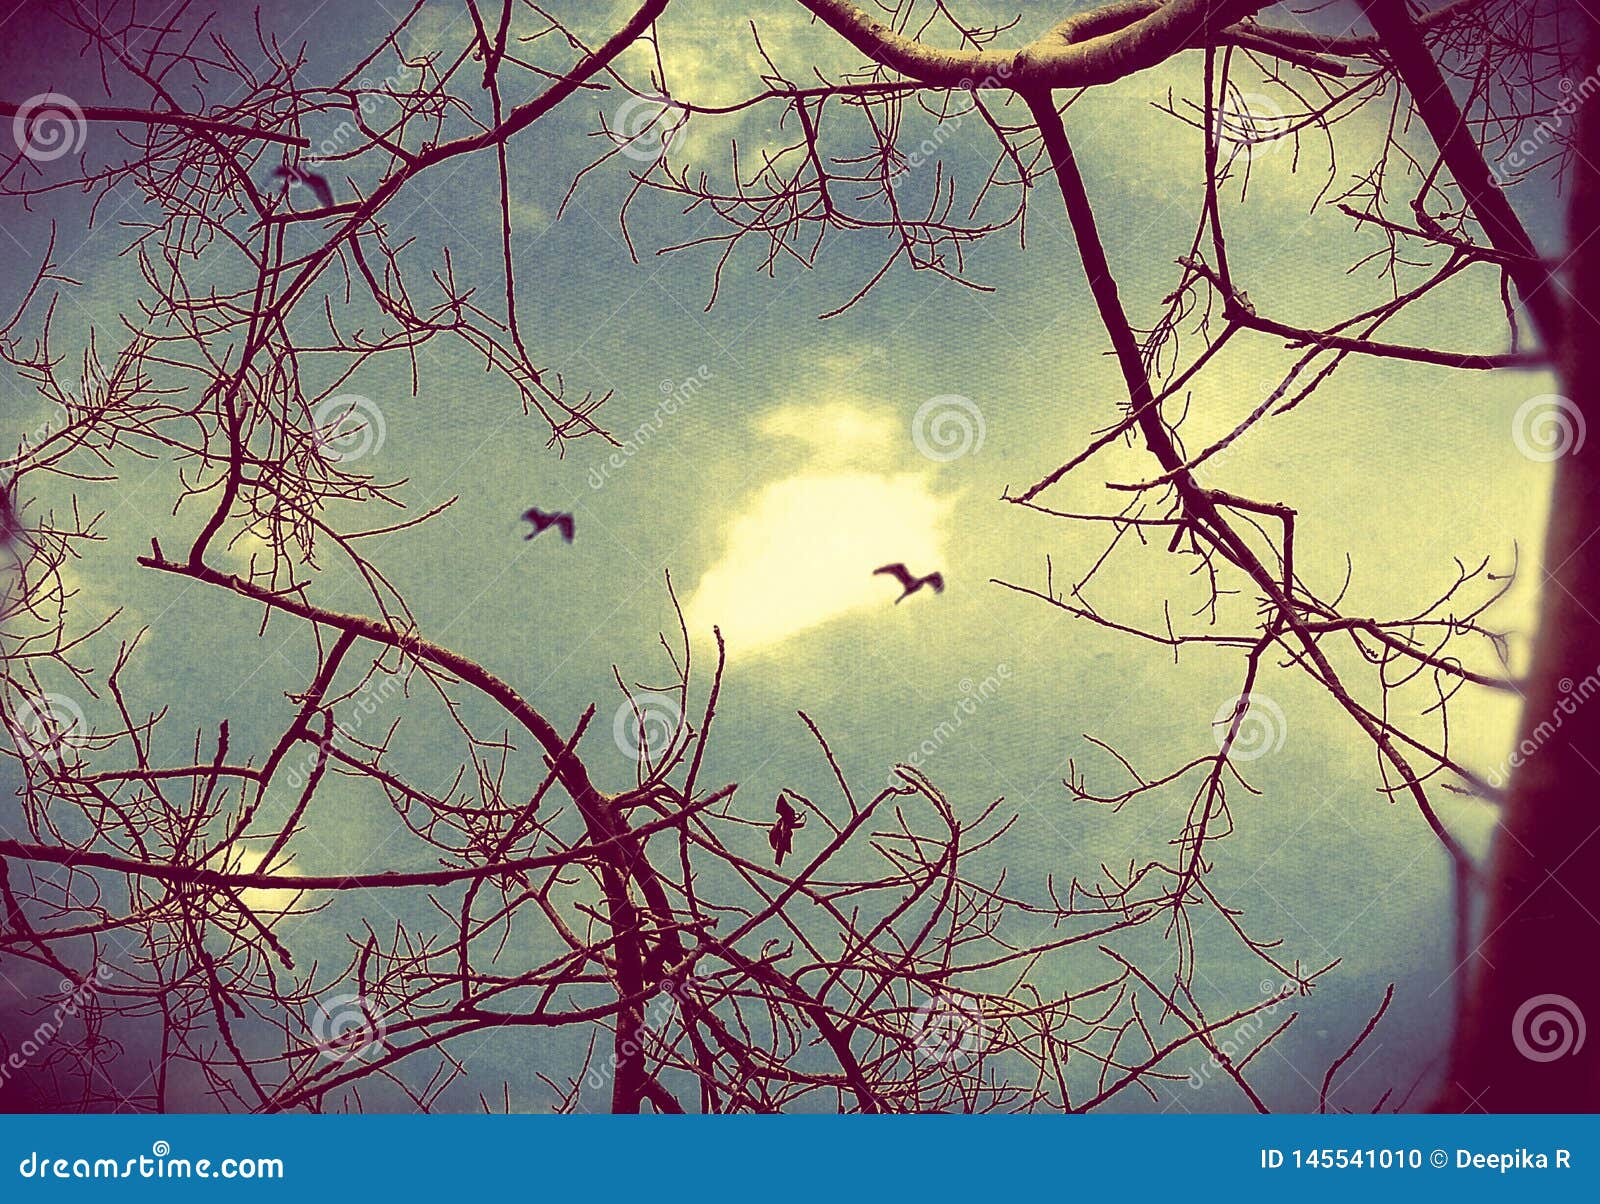 An Artistic Picture of a Leafless Tree Branches with Sky Background and